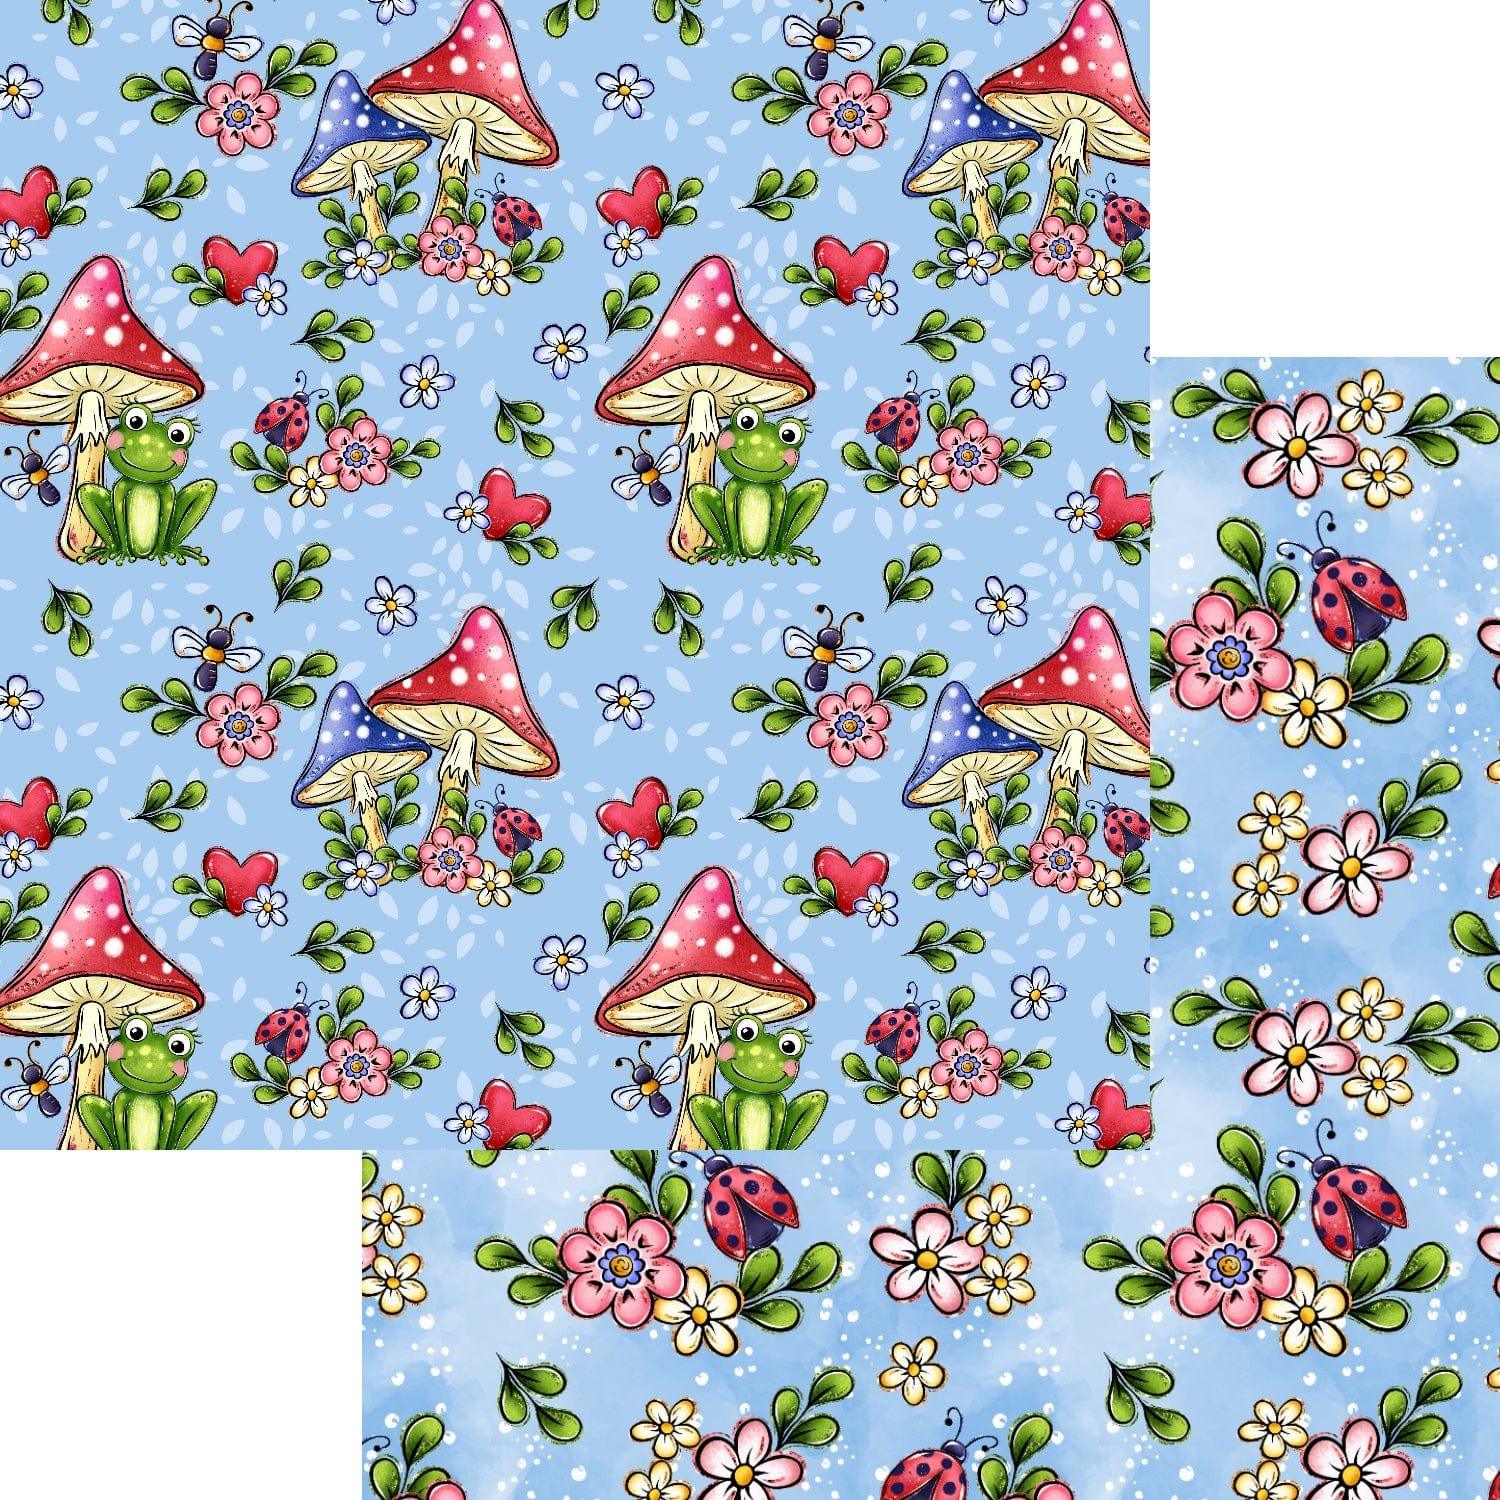 Phantasia Design's Frogs In The Morass Collection Mushroom Fields 12 x 12 Double-Sided Scrapbook Paper by SSC Designs - Scrapbook Supply Companies